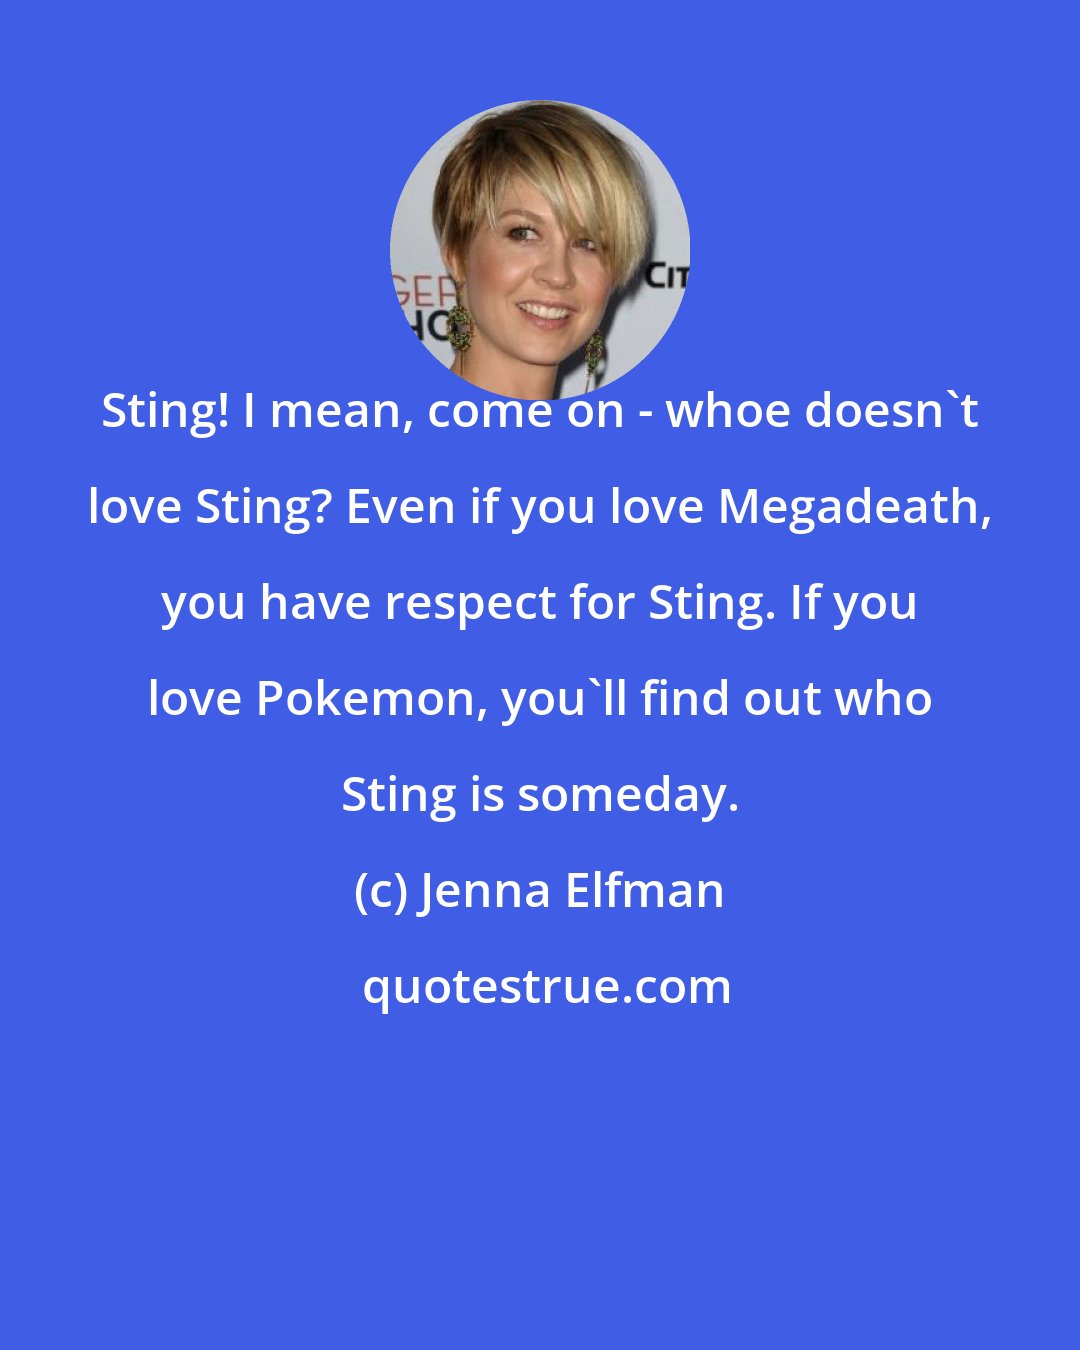 Jenna Elfman: Sting! I mean, come on - whoe doesn't love Sting? Even if you love Megadeath, you have respect for Sting. If you love Pokemon, you'll find out who Sting is someday.